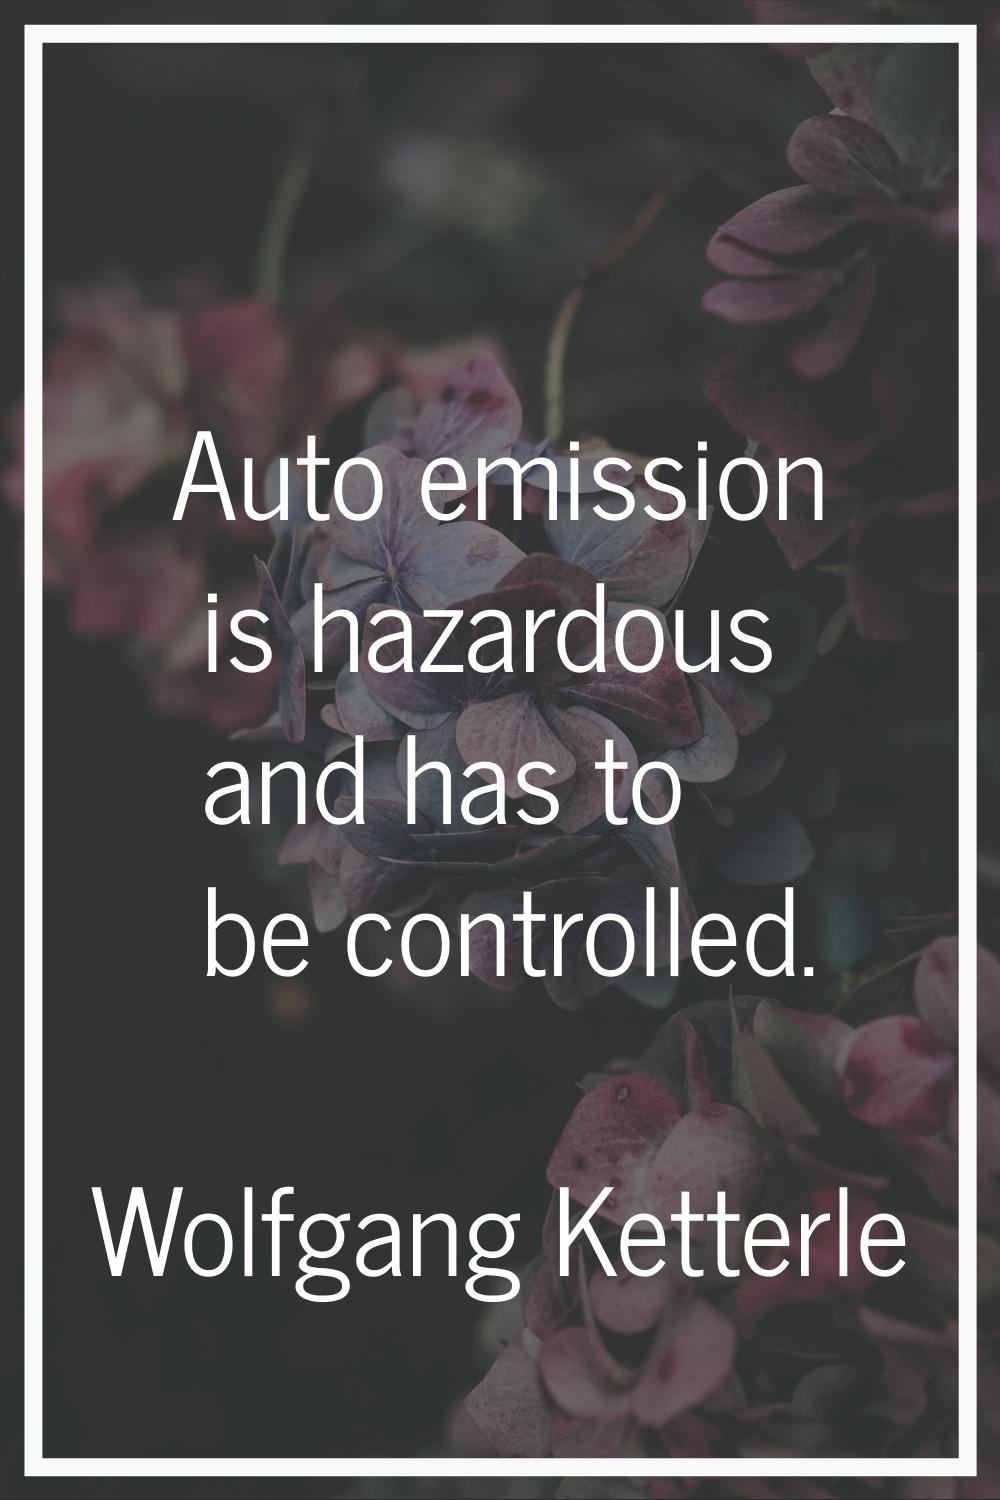 Auto emission is hazardous and has to be controlled.